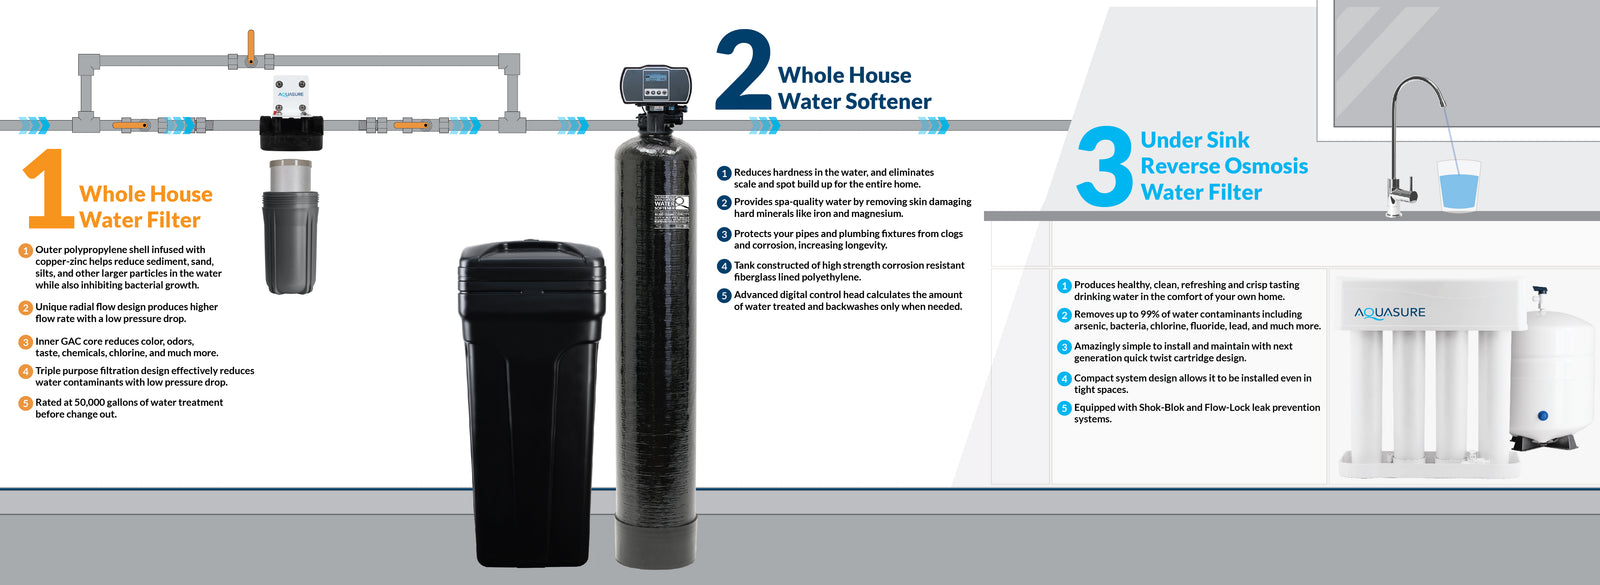 Aquasure AS-WHF48D Whole House Filtration with 48,000 Grain Water Softener Reverse Osmosis System and Sediment-GAC Pre-filter Bundle New